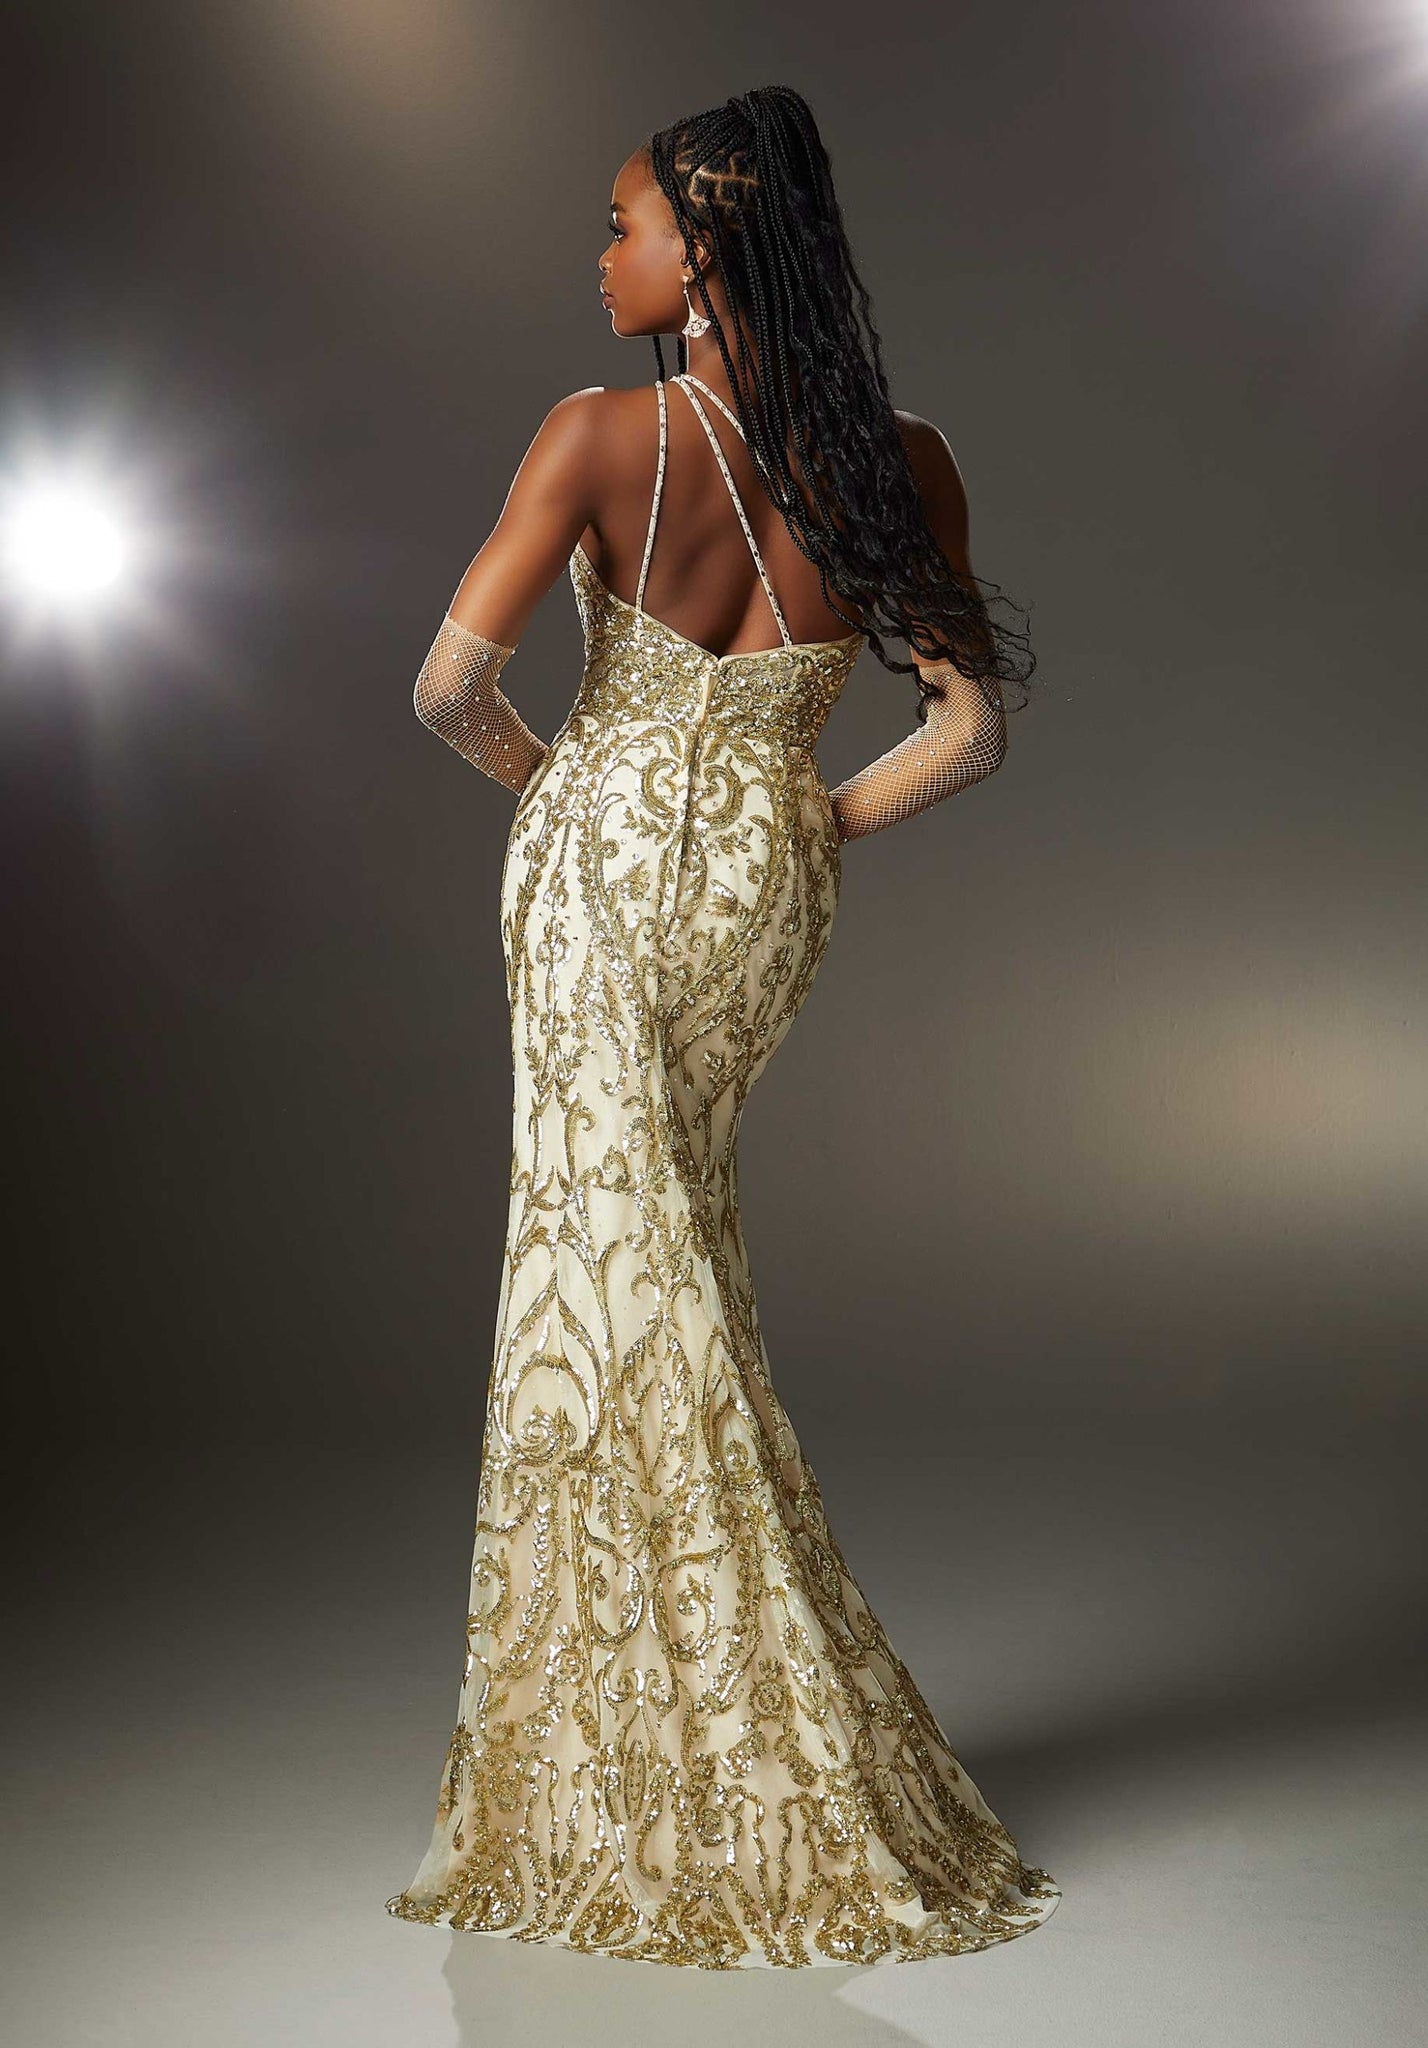 Have a major fashion moment in this amazing Morilee long fitted dress 47002. The neckline showcases scalloped details among the trim and the single shoulder branches into three thin beaded straps across your back. The bodice is made from a sheer illusion decked in a gorgeous pattern of sequins beadwork and travels down the long skirt. A front side slit and sweeping train add to the glam factor.